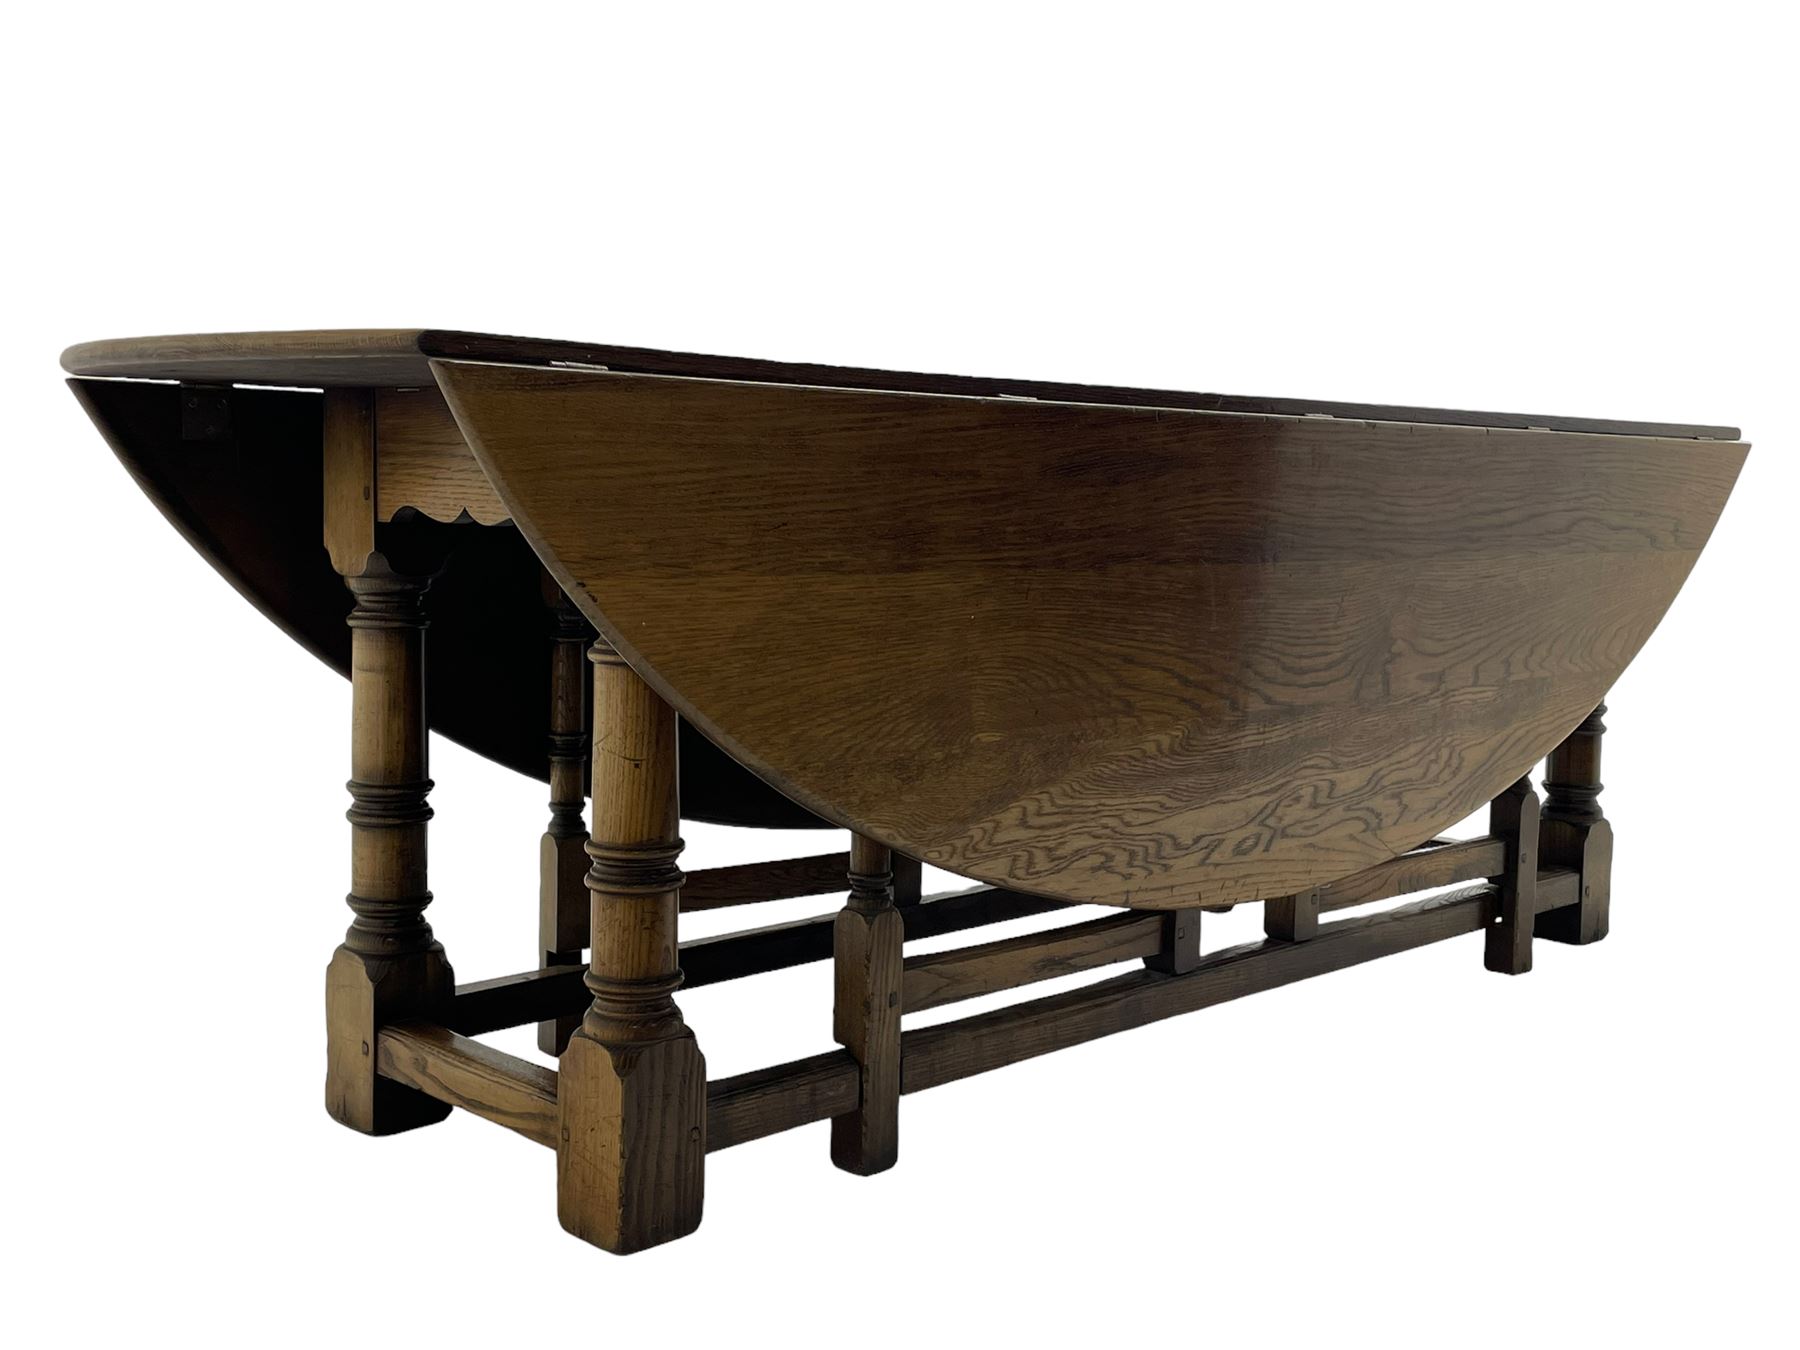 Large 18th century design oak wake or dining table - Image 11 of 12